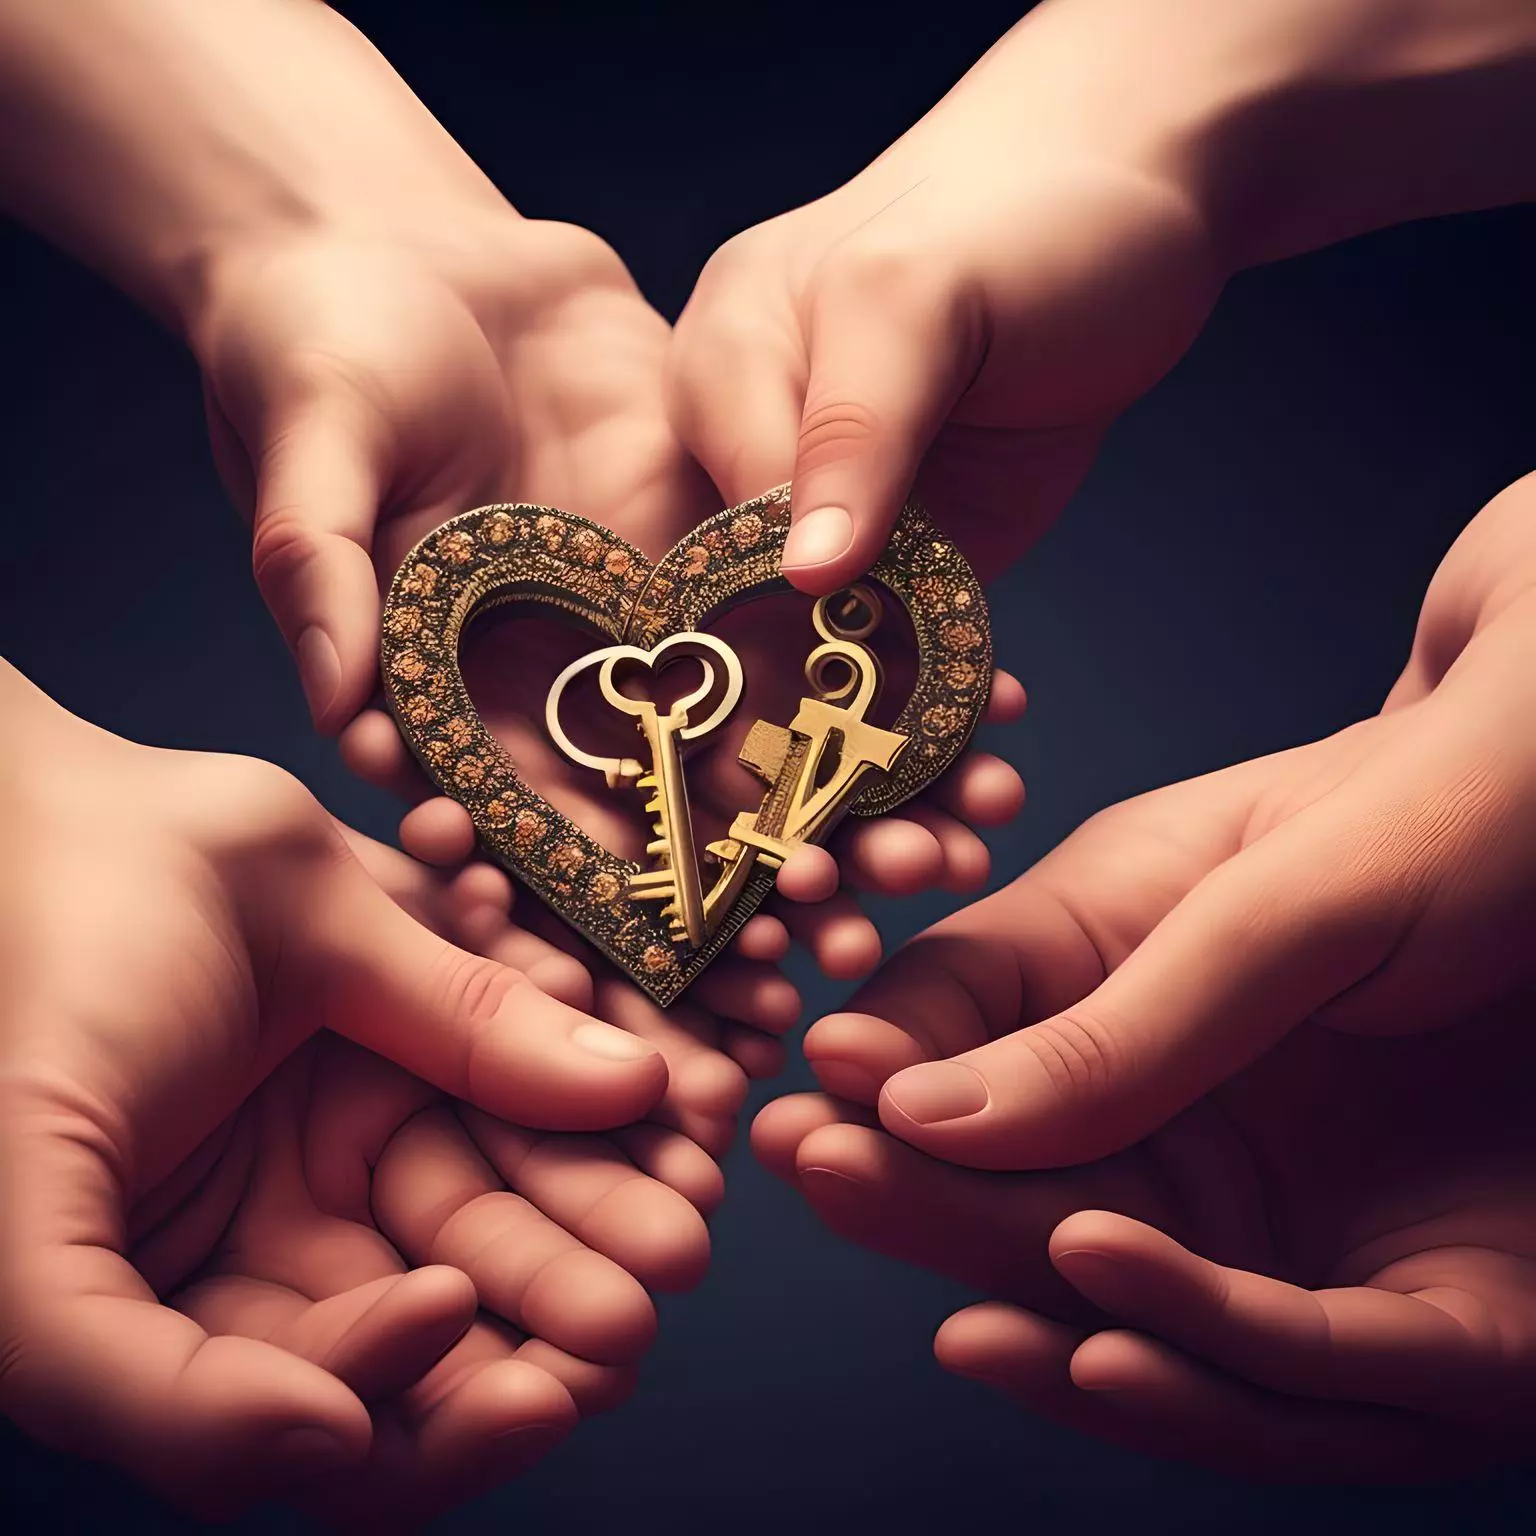 4 hands grabbing onto a heart amulet with a key inside